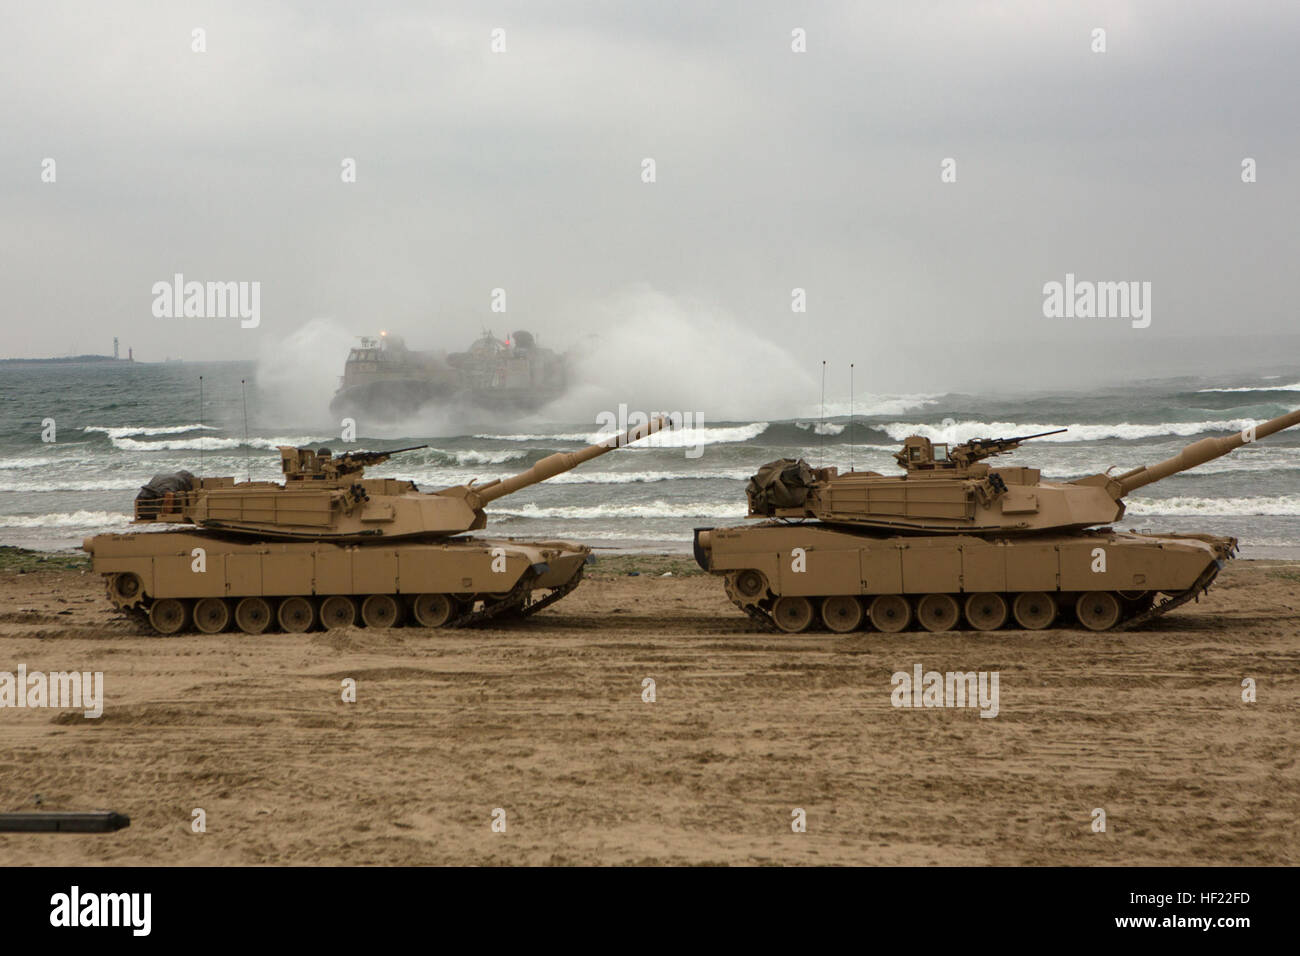 U.S. Marine Corps M1A1 Abrams Tanks with Charlie Company, 4th Tank Battalion, 4th Marine Division attached to III Marine Expeditionary Brigade are offloaded from Landing Craft Air Cushioned during Exercise Ssang Yong 14 at Dogue Beach, Pohang, South Korea, April 3, 2014. Exercise Ssang Yong is conducted annually in the ROK to enhance interoperability between U.S. and ROK forces by performing a full spectrum of amphibious operations while showcasing sea-based power projection in the Pacific. (U.S. Marine Corps Photo by Cpl. Sara A. Medina, III MEF Combat Camera/Released) M1A1 Abrams Tanks offlo Stock Photo